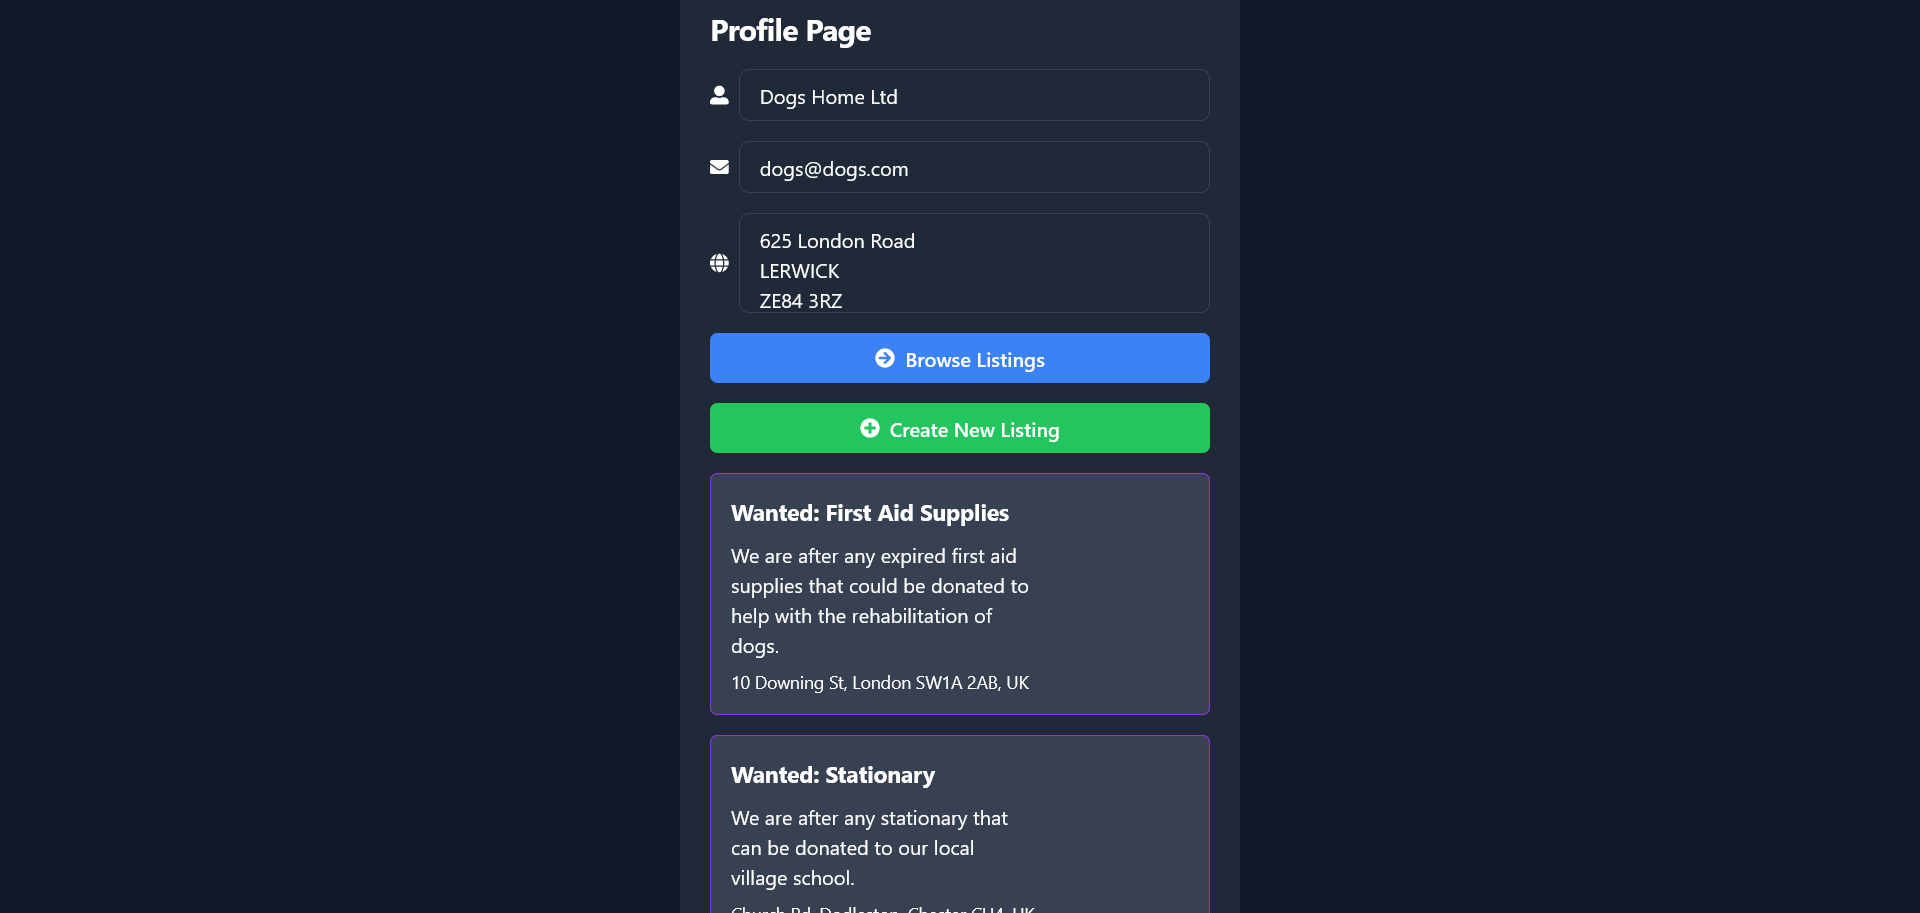 Image showing the profile page